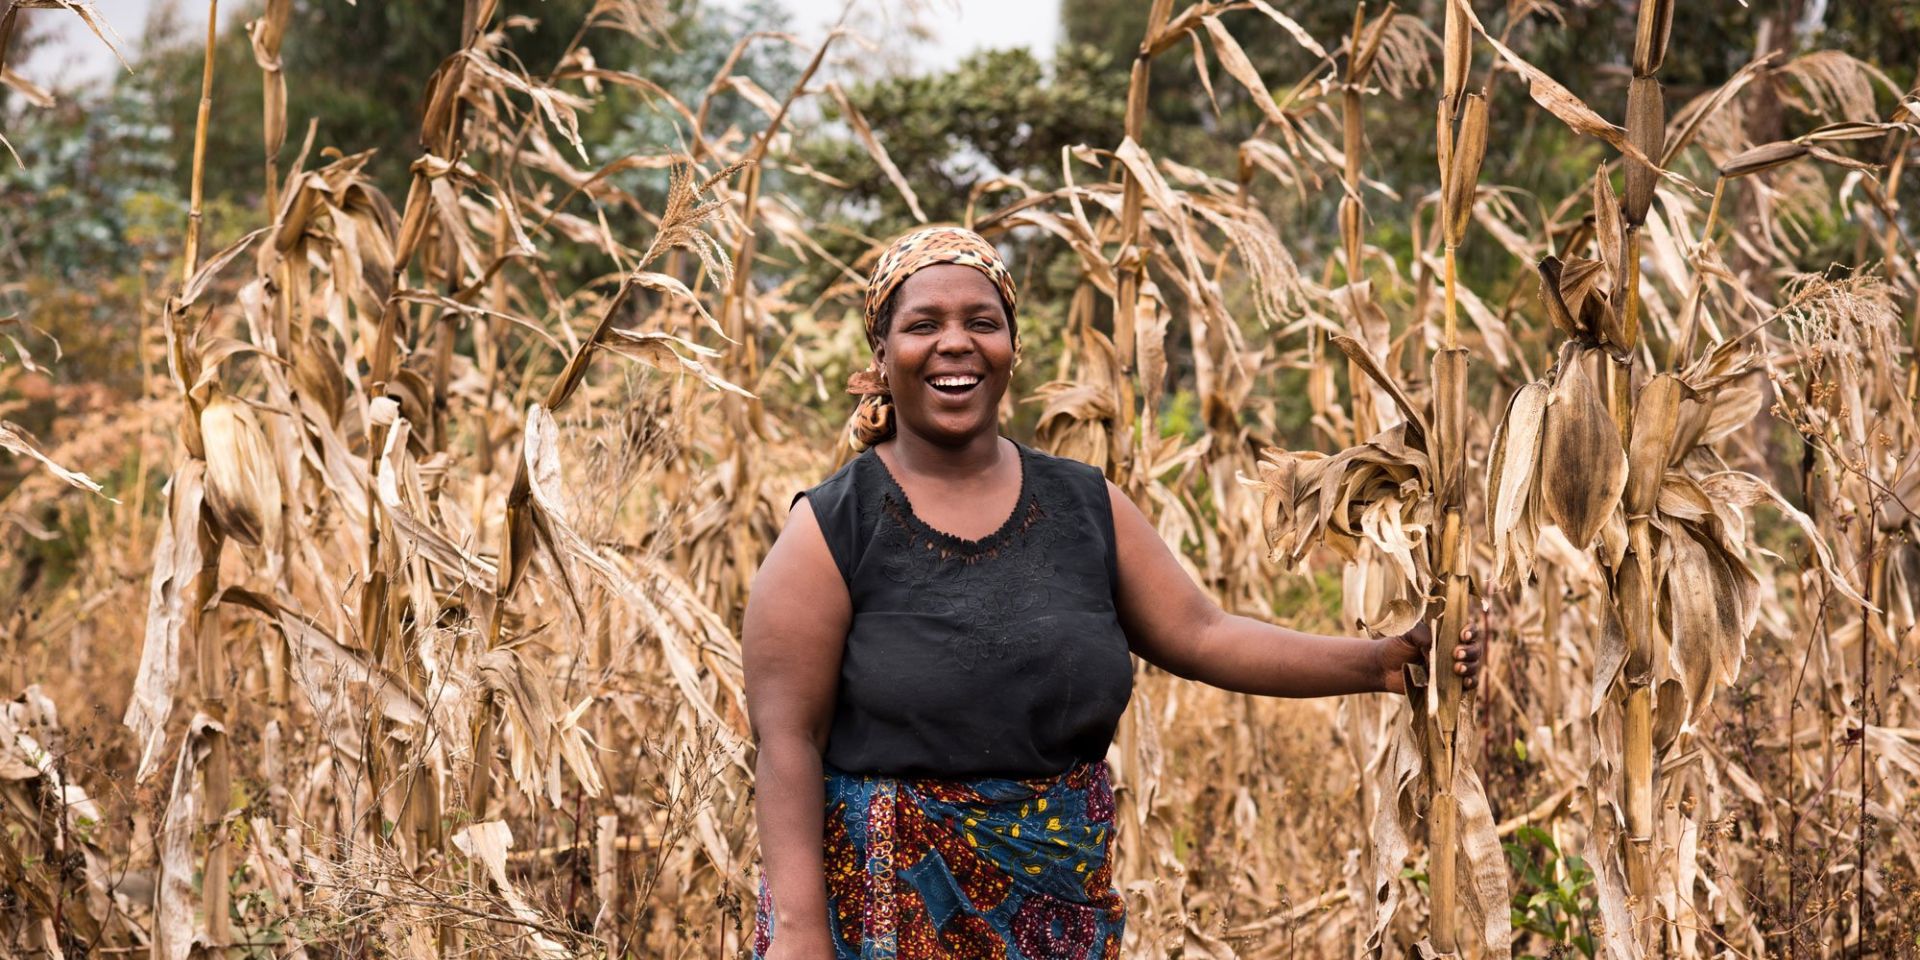 Female farmer with maize crop